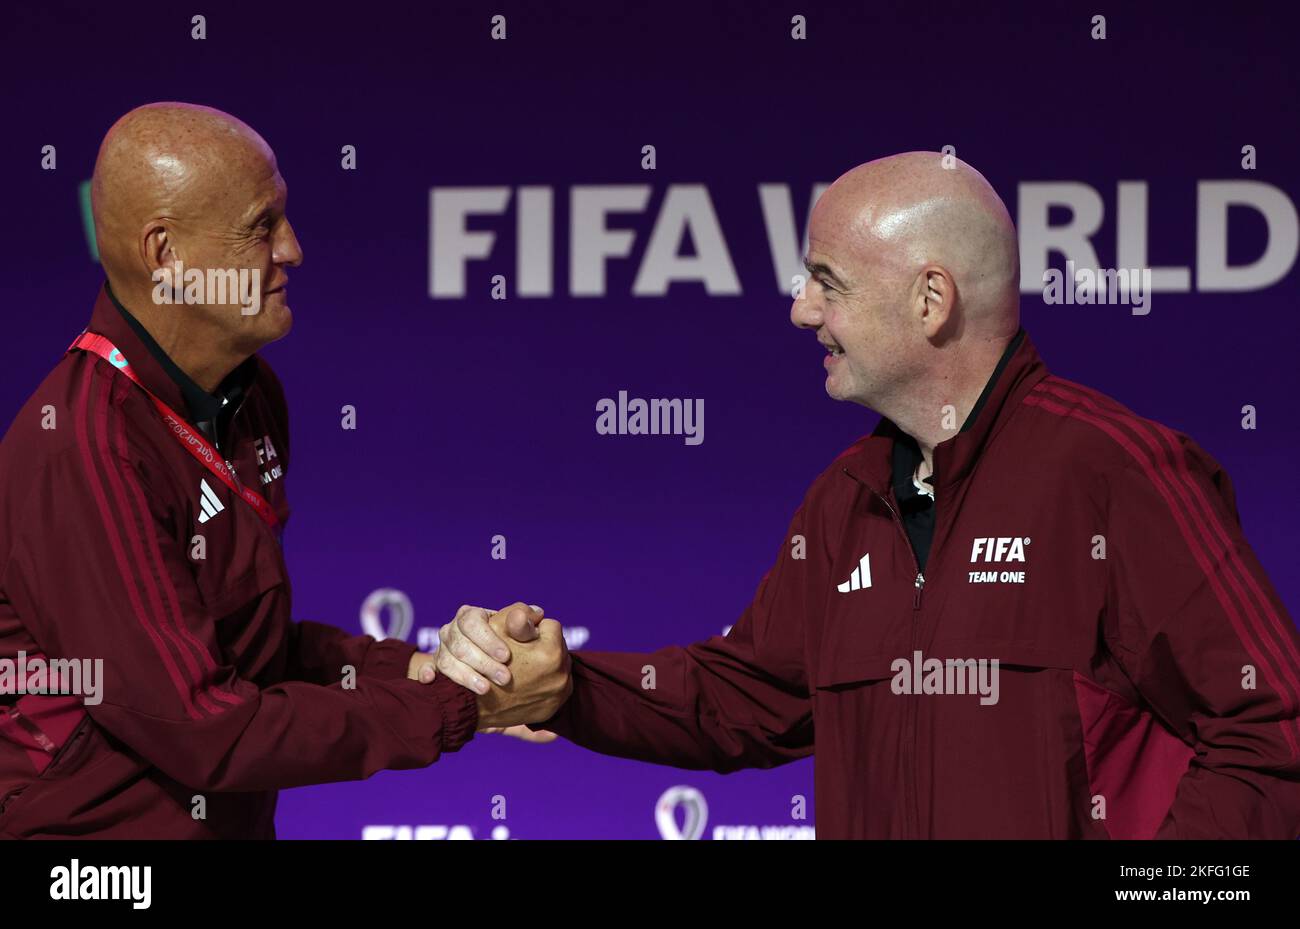 Doha, Qatar. 18th Nov, 2022. FIFA President Gianni Infantino (R) shakes hands with Pierluigi Collina, chairman of the FIFA Referees Committee, during a media briefing at 2022 Qatar World Cup Main Media Centre in Doha, Qatar, Nov. 18, 2022. Credit: Jia Haocheng/Xinhua/Alamy Live News Stock Photo